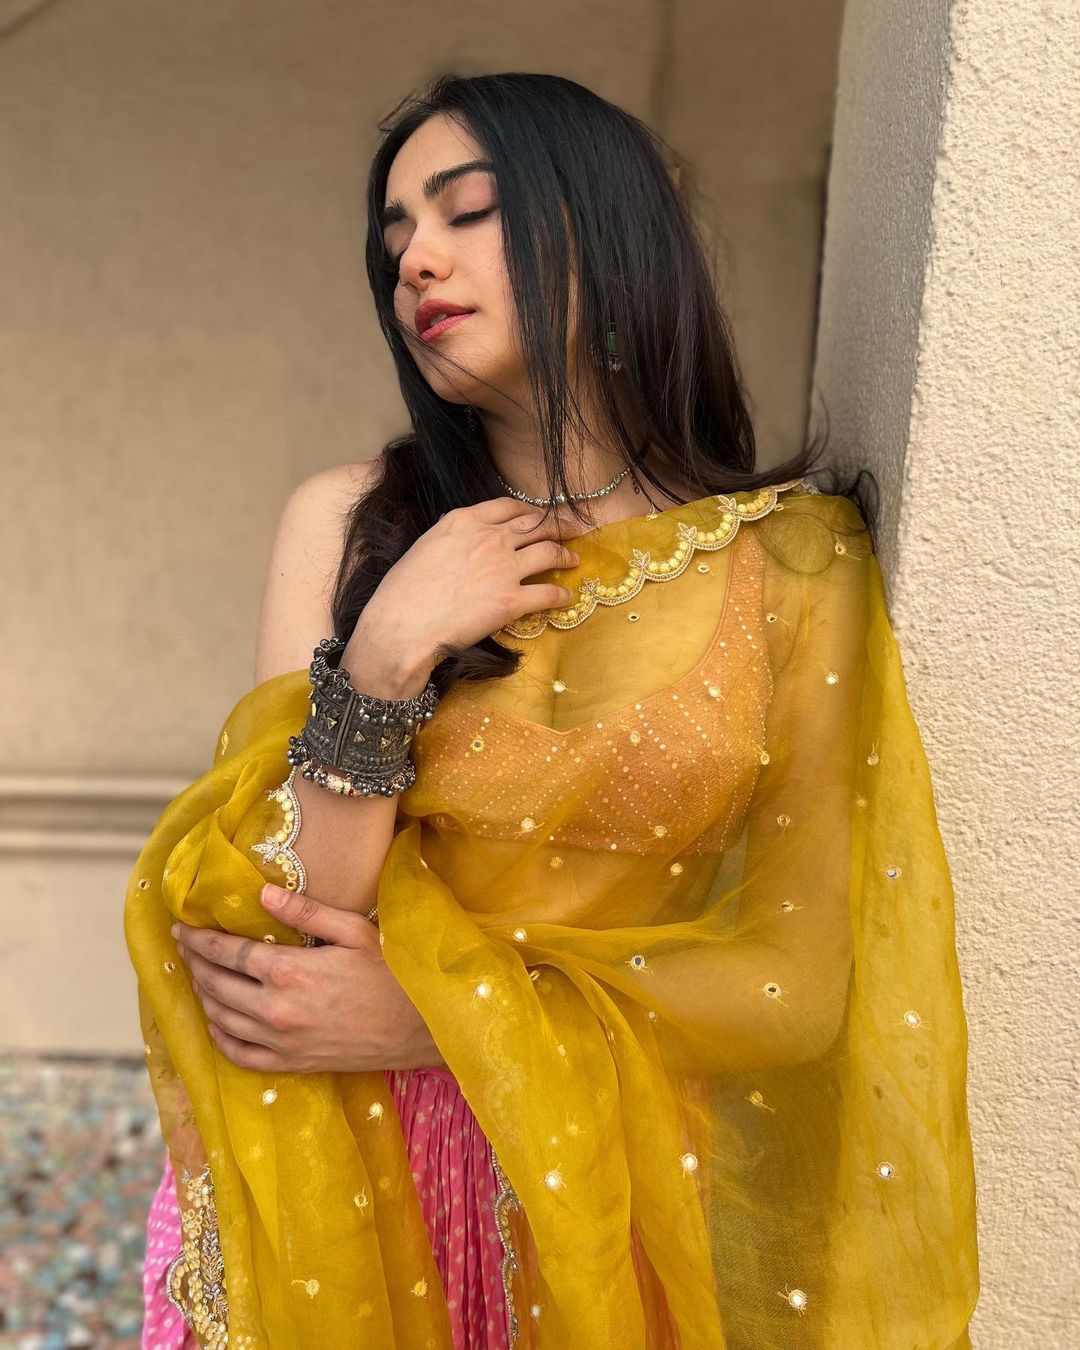 Adah Sharma Looks The Sexiest In Ethnic Ensembles, Check Pics